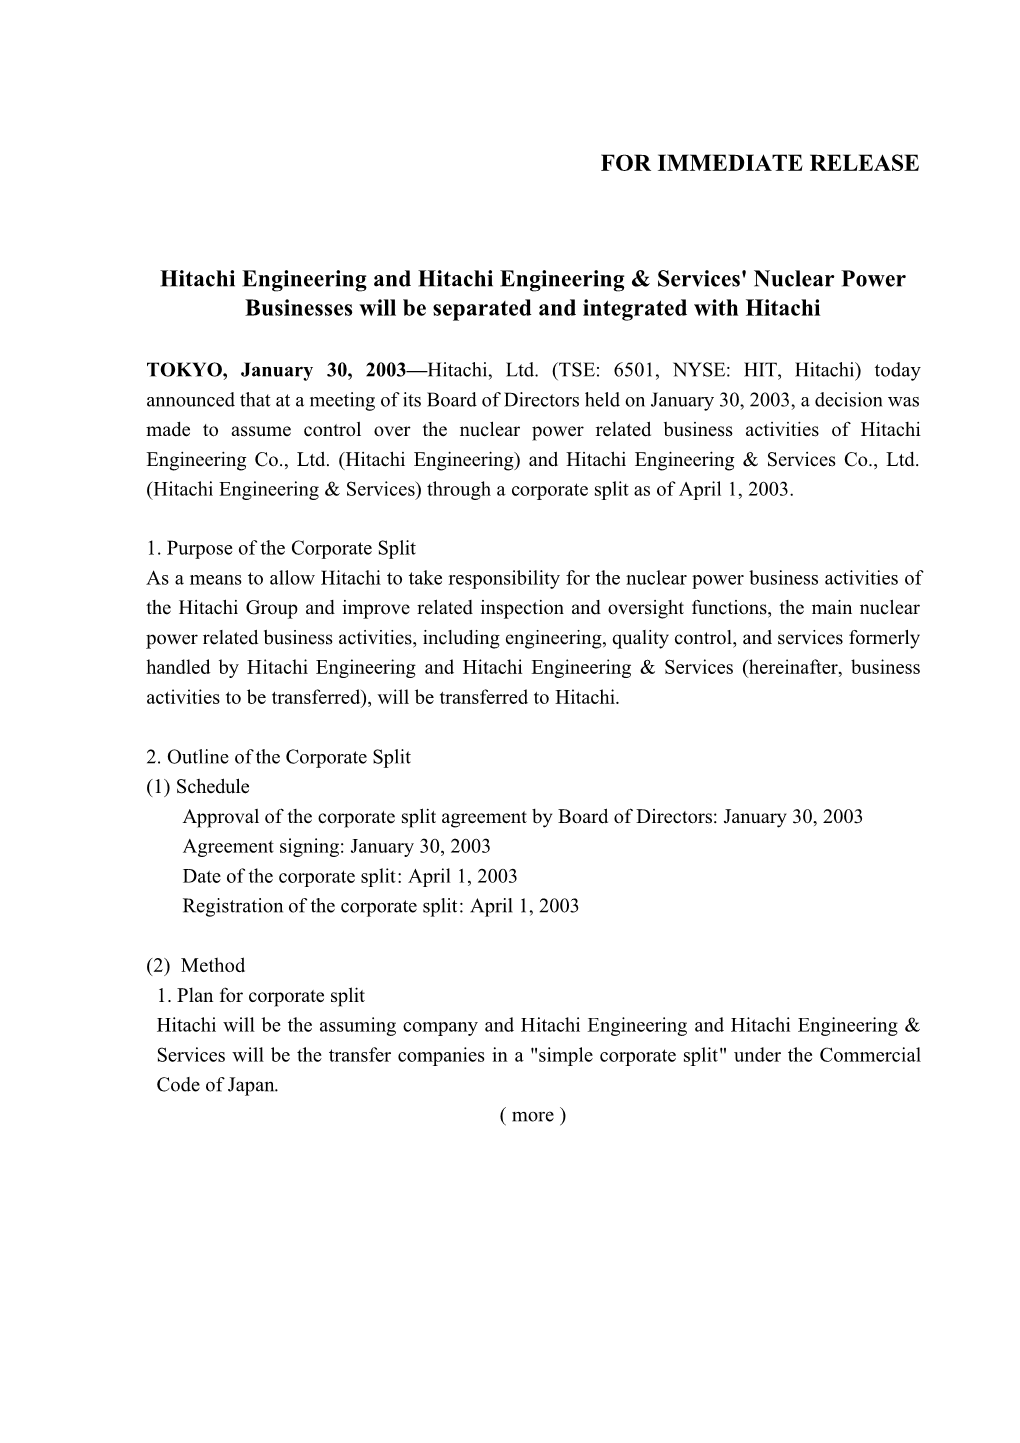 Hitachi Engineering and Hitachi Engineering & Services' Nuclear